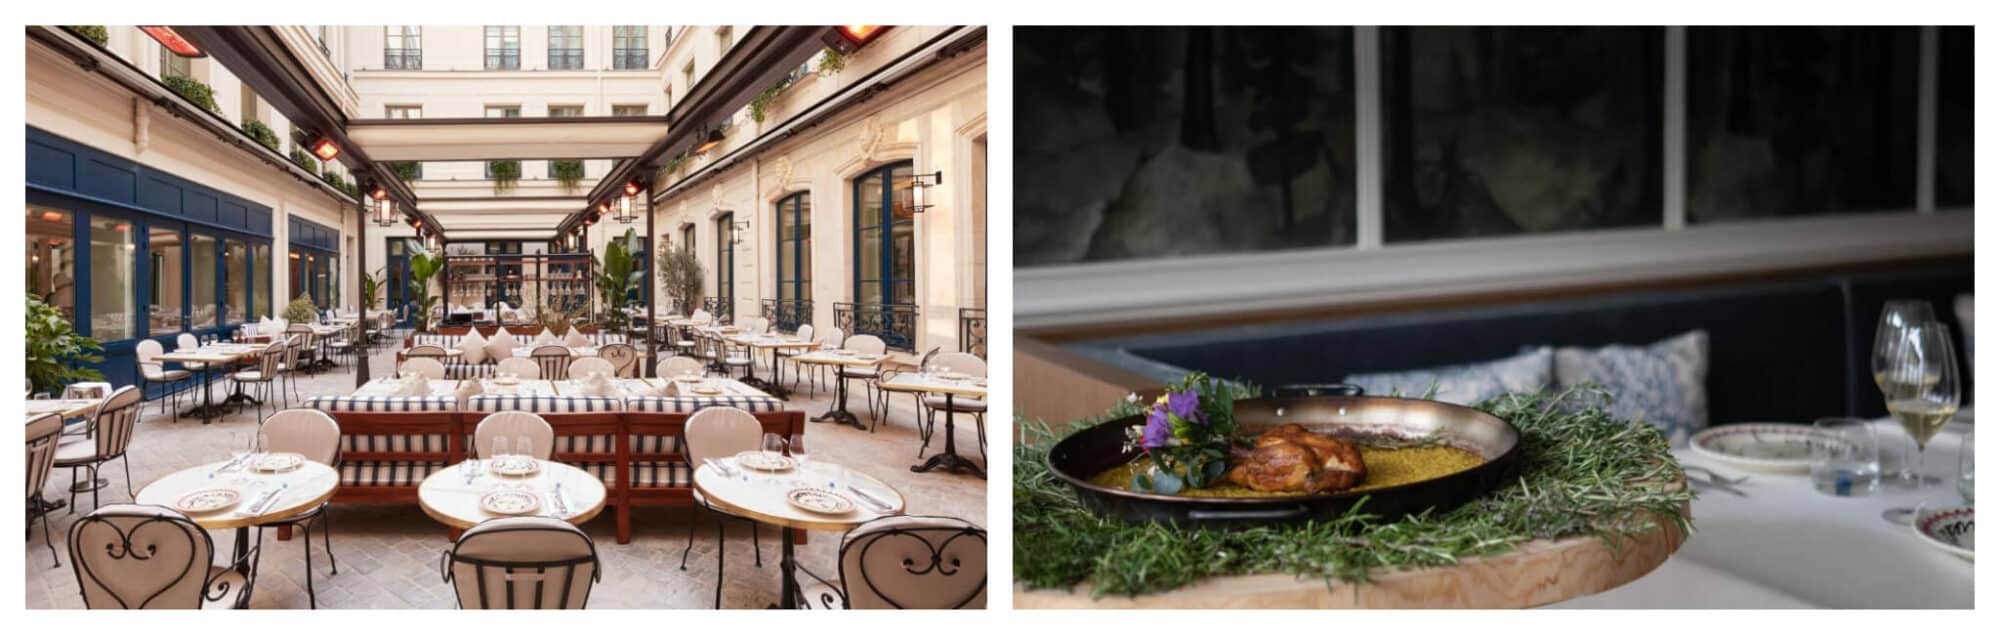 Left: La Chambre Bleue's Parisian courtyard restaurant area with beige tables and chairs; Right: a paella dish is served in a black plate at La Chambre Bleue.